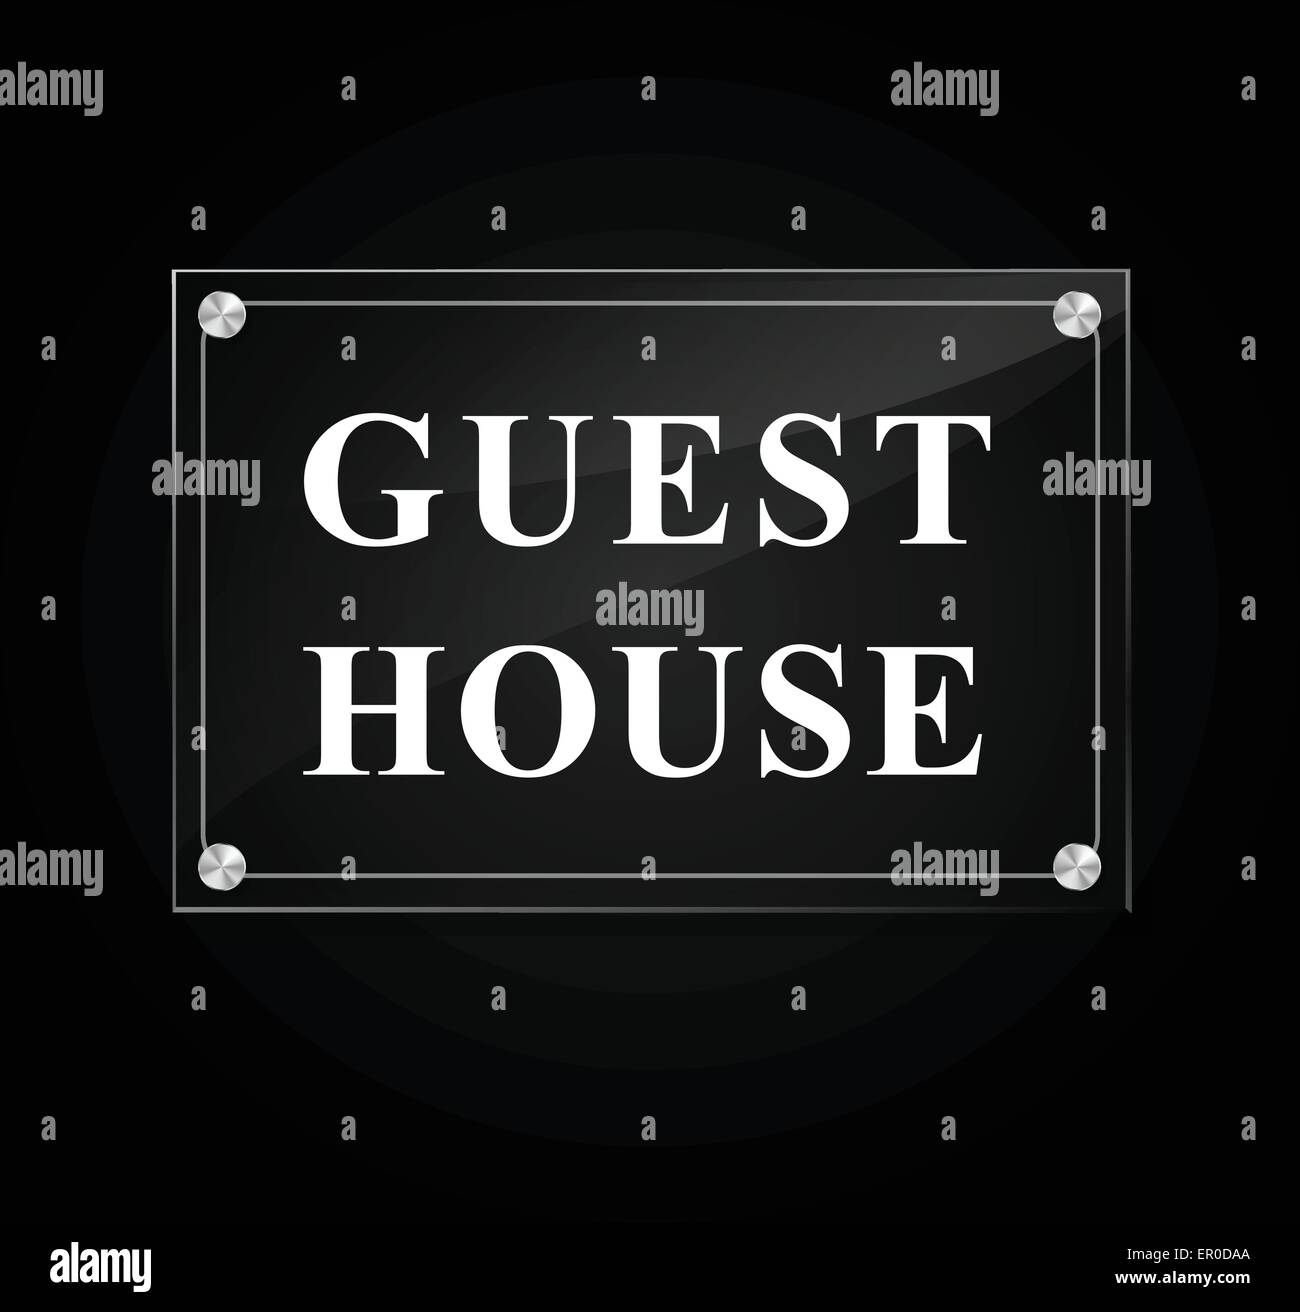 Illustration of guest house sign on black background Stock Vector